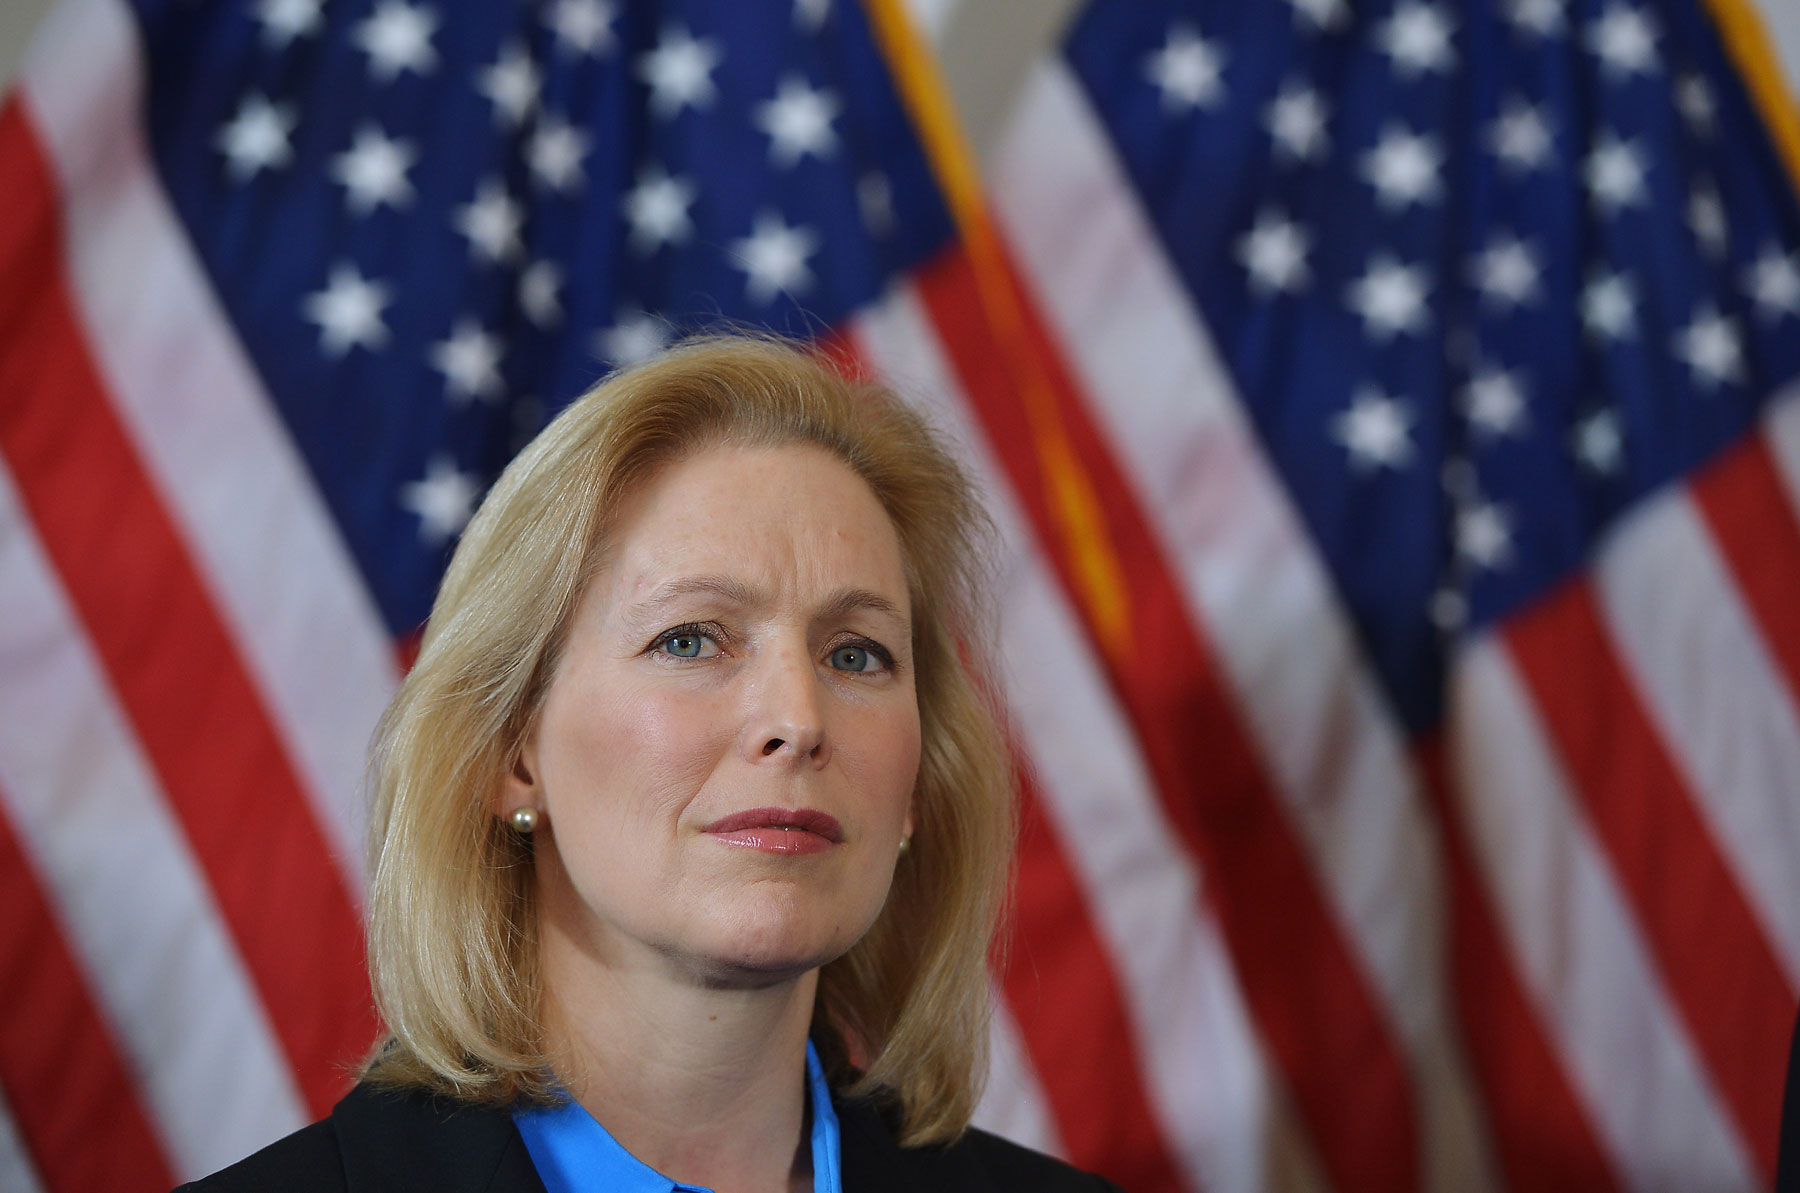 Senator Kirsten Gillibrand attends a press conference on Capitol Hill in Washington, D.C. on Feb. 6, 2014, calling for the creation of an independent military justice system to deal with sexual assault in the military. (Mandel Ngan—AFP/Getty Images)